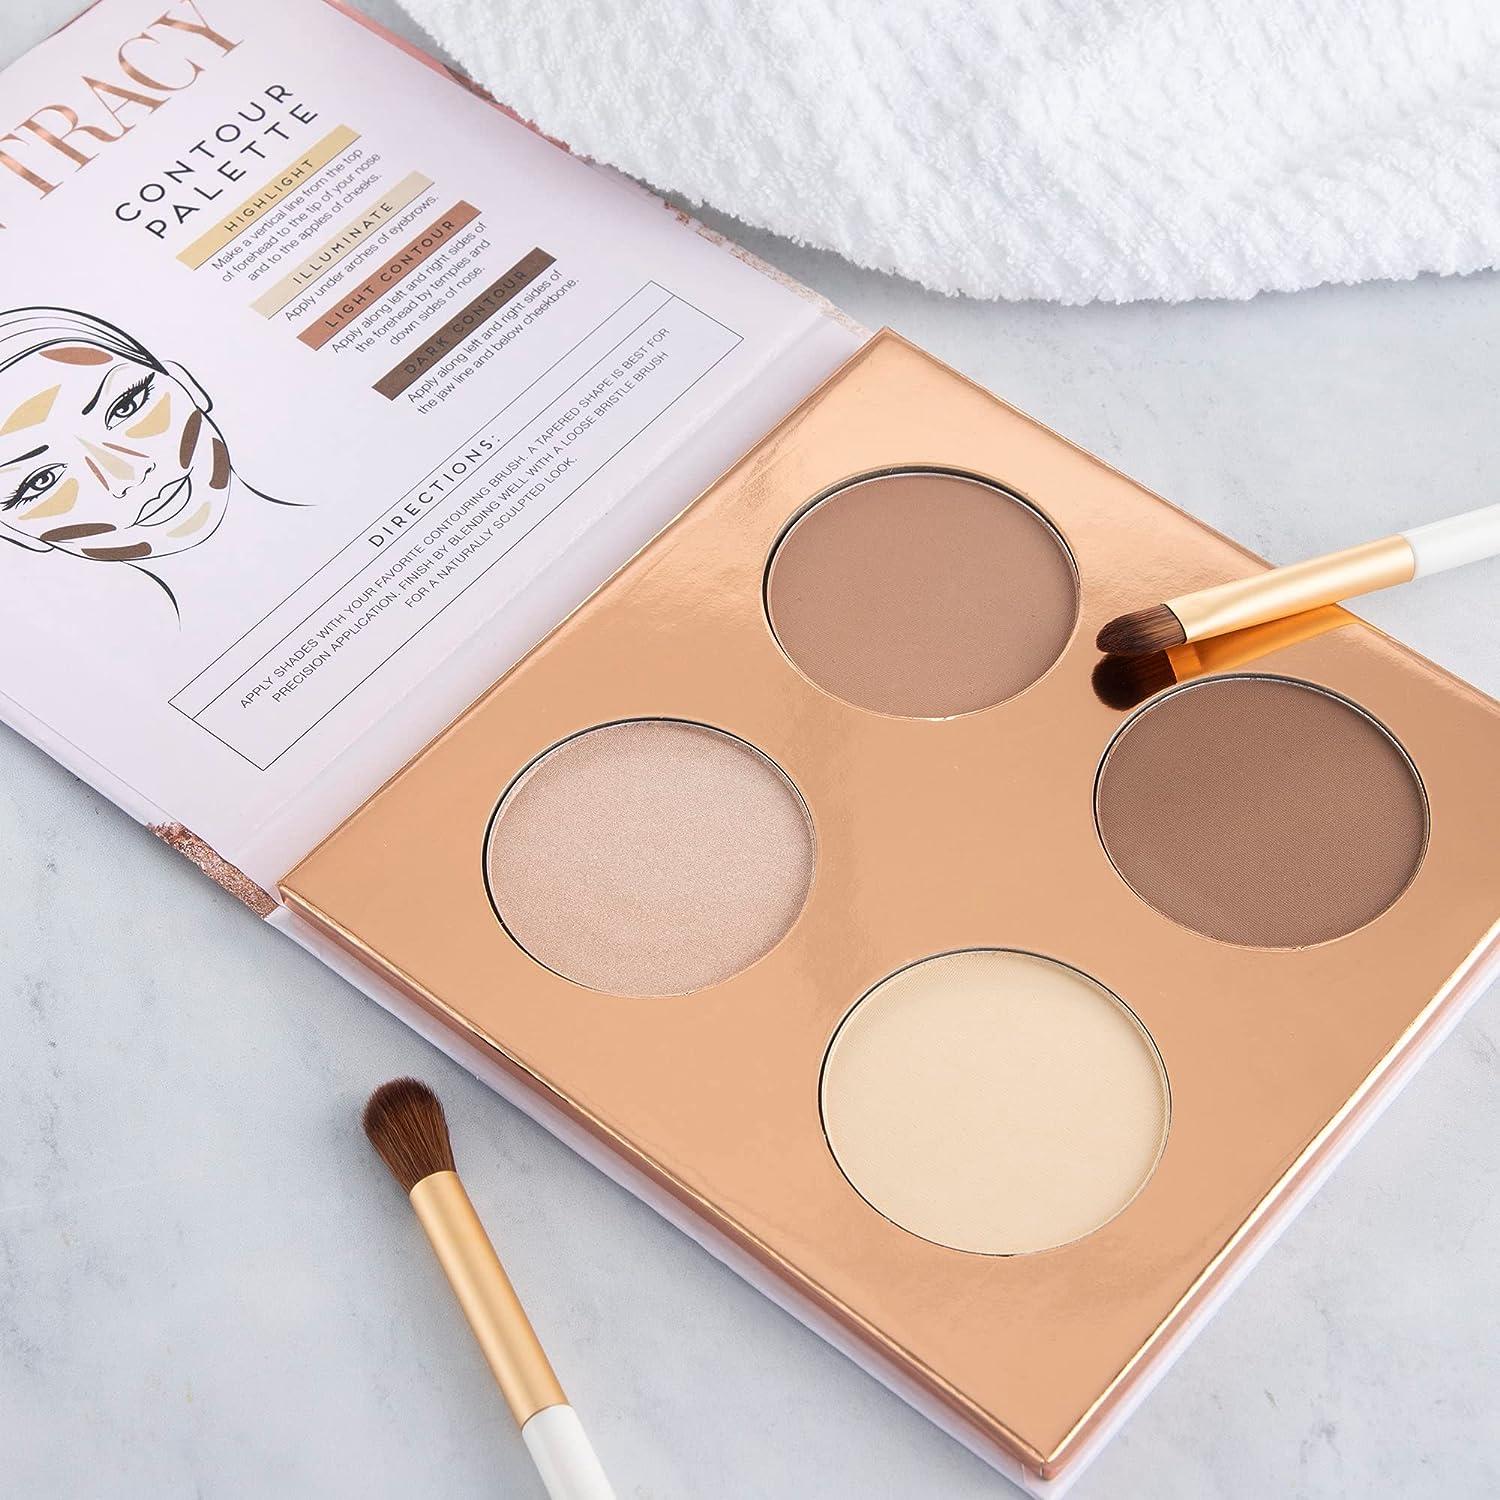 Ellen Tracy 3 shades Contour Collection Highlight , Conceal~ All day wear